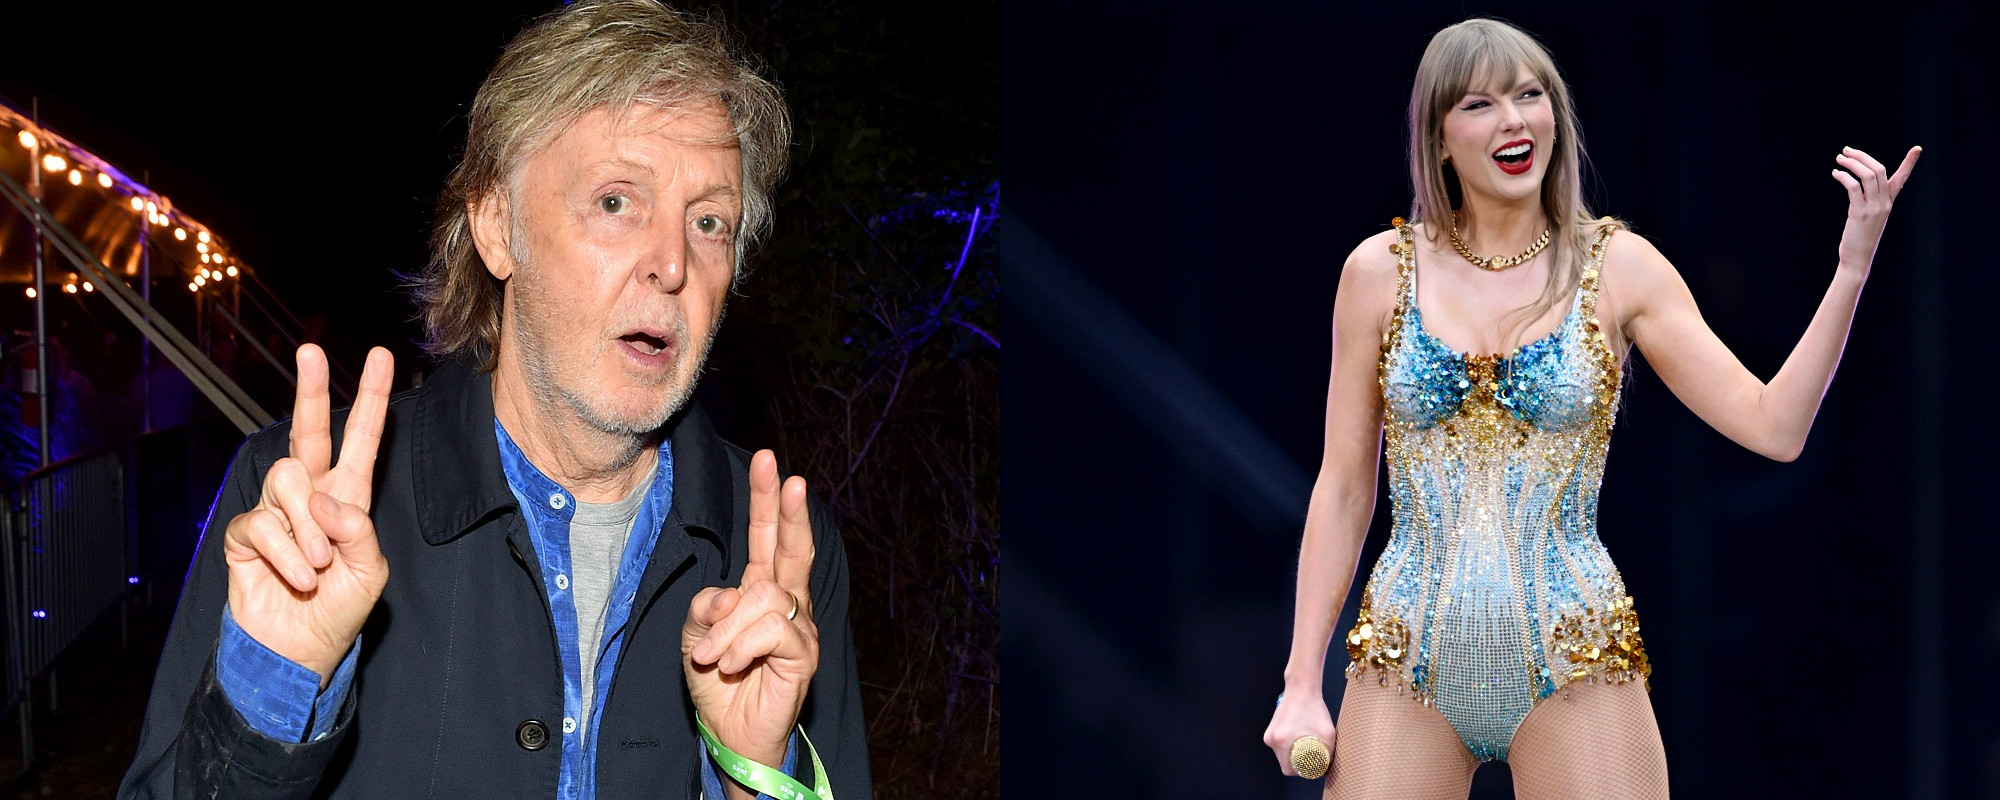 Hello, London: Paul McCartney Spotted Dancing with Fans at Taylor Swift’s Wembley Stadium Concert This Weekend